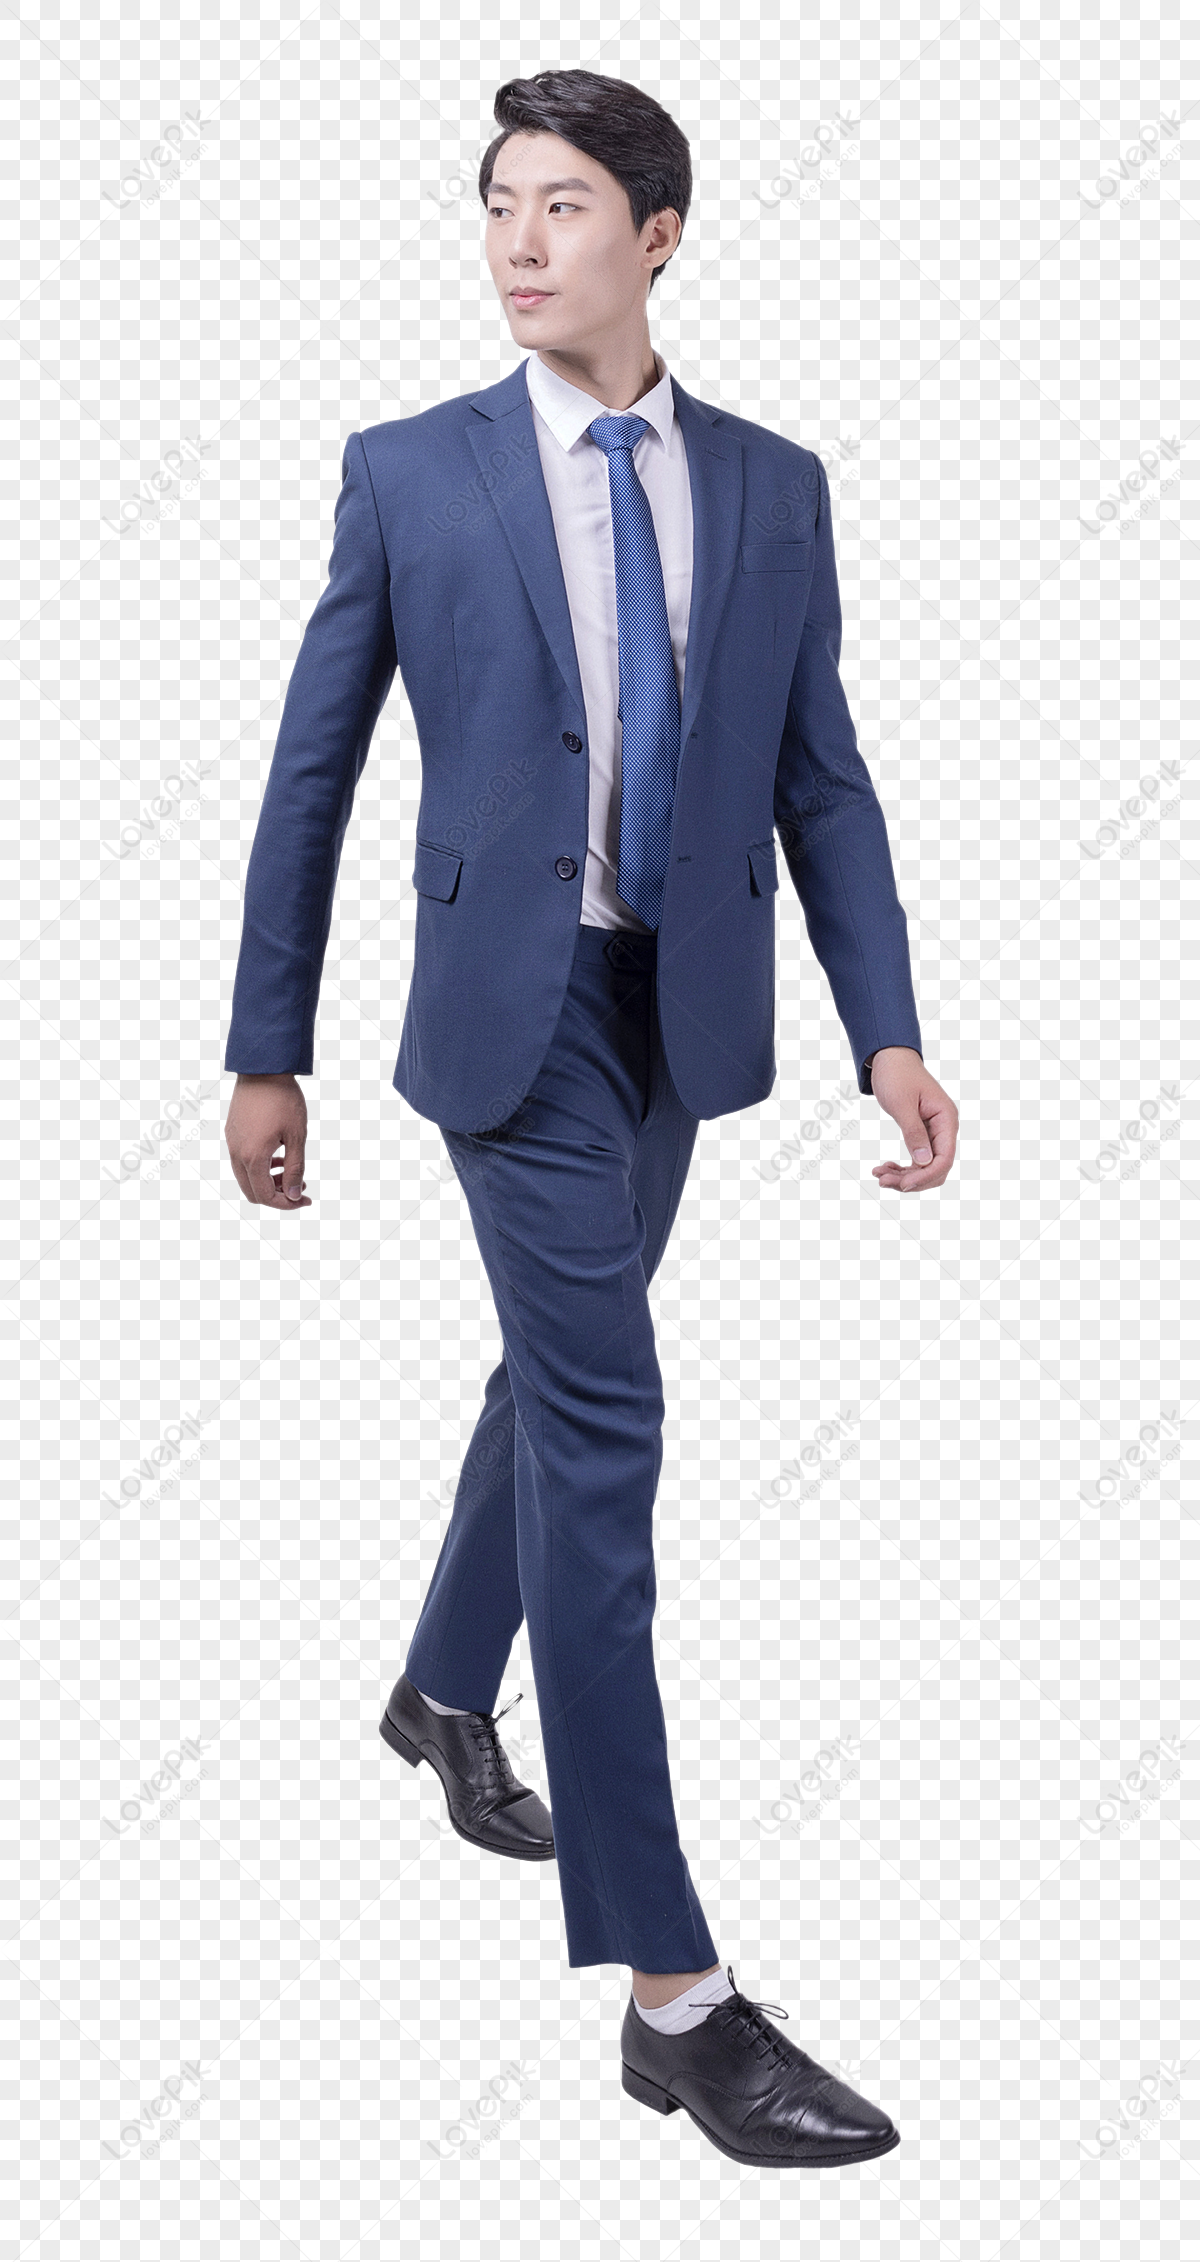 Business Personage Walking PNG Image Free Download And Clipart Image ...